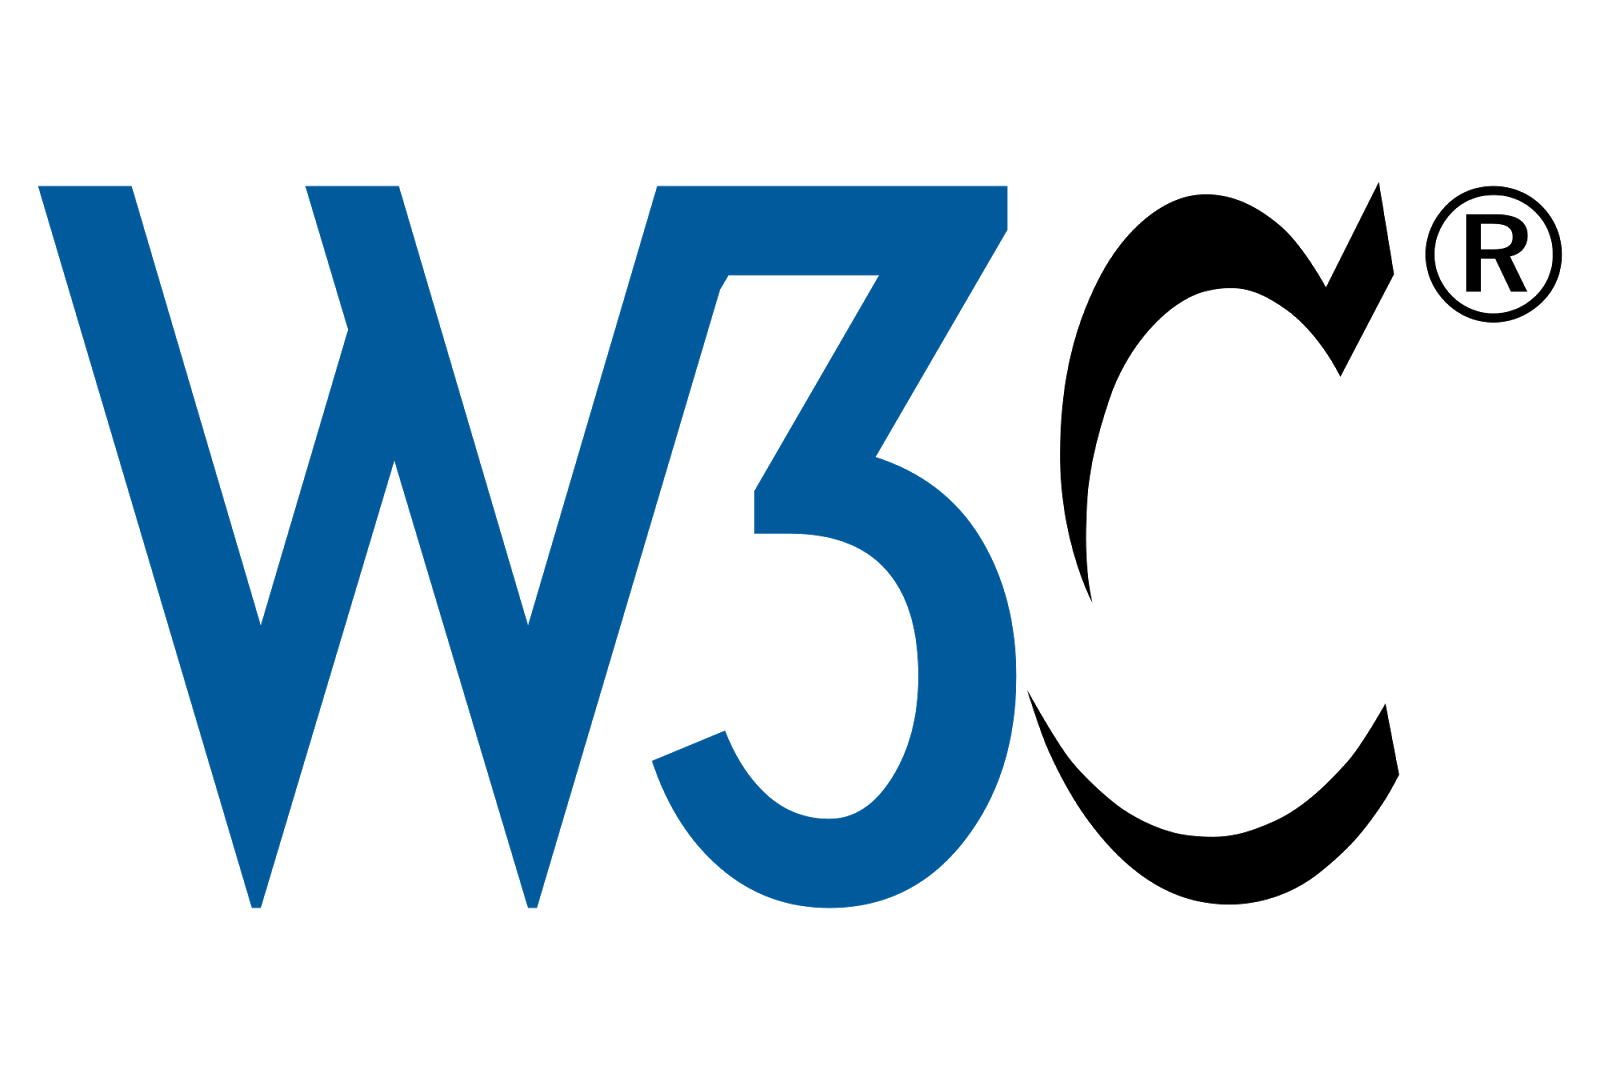 How to join a W3C Working Group: our experience as editors of the Data on the Web Best Practices Working Group